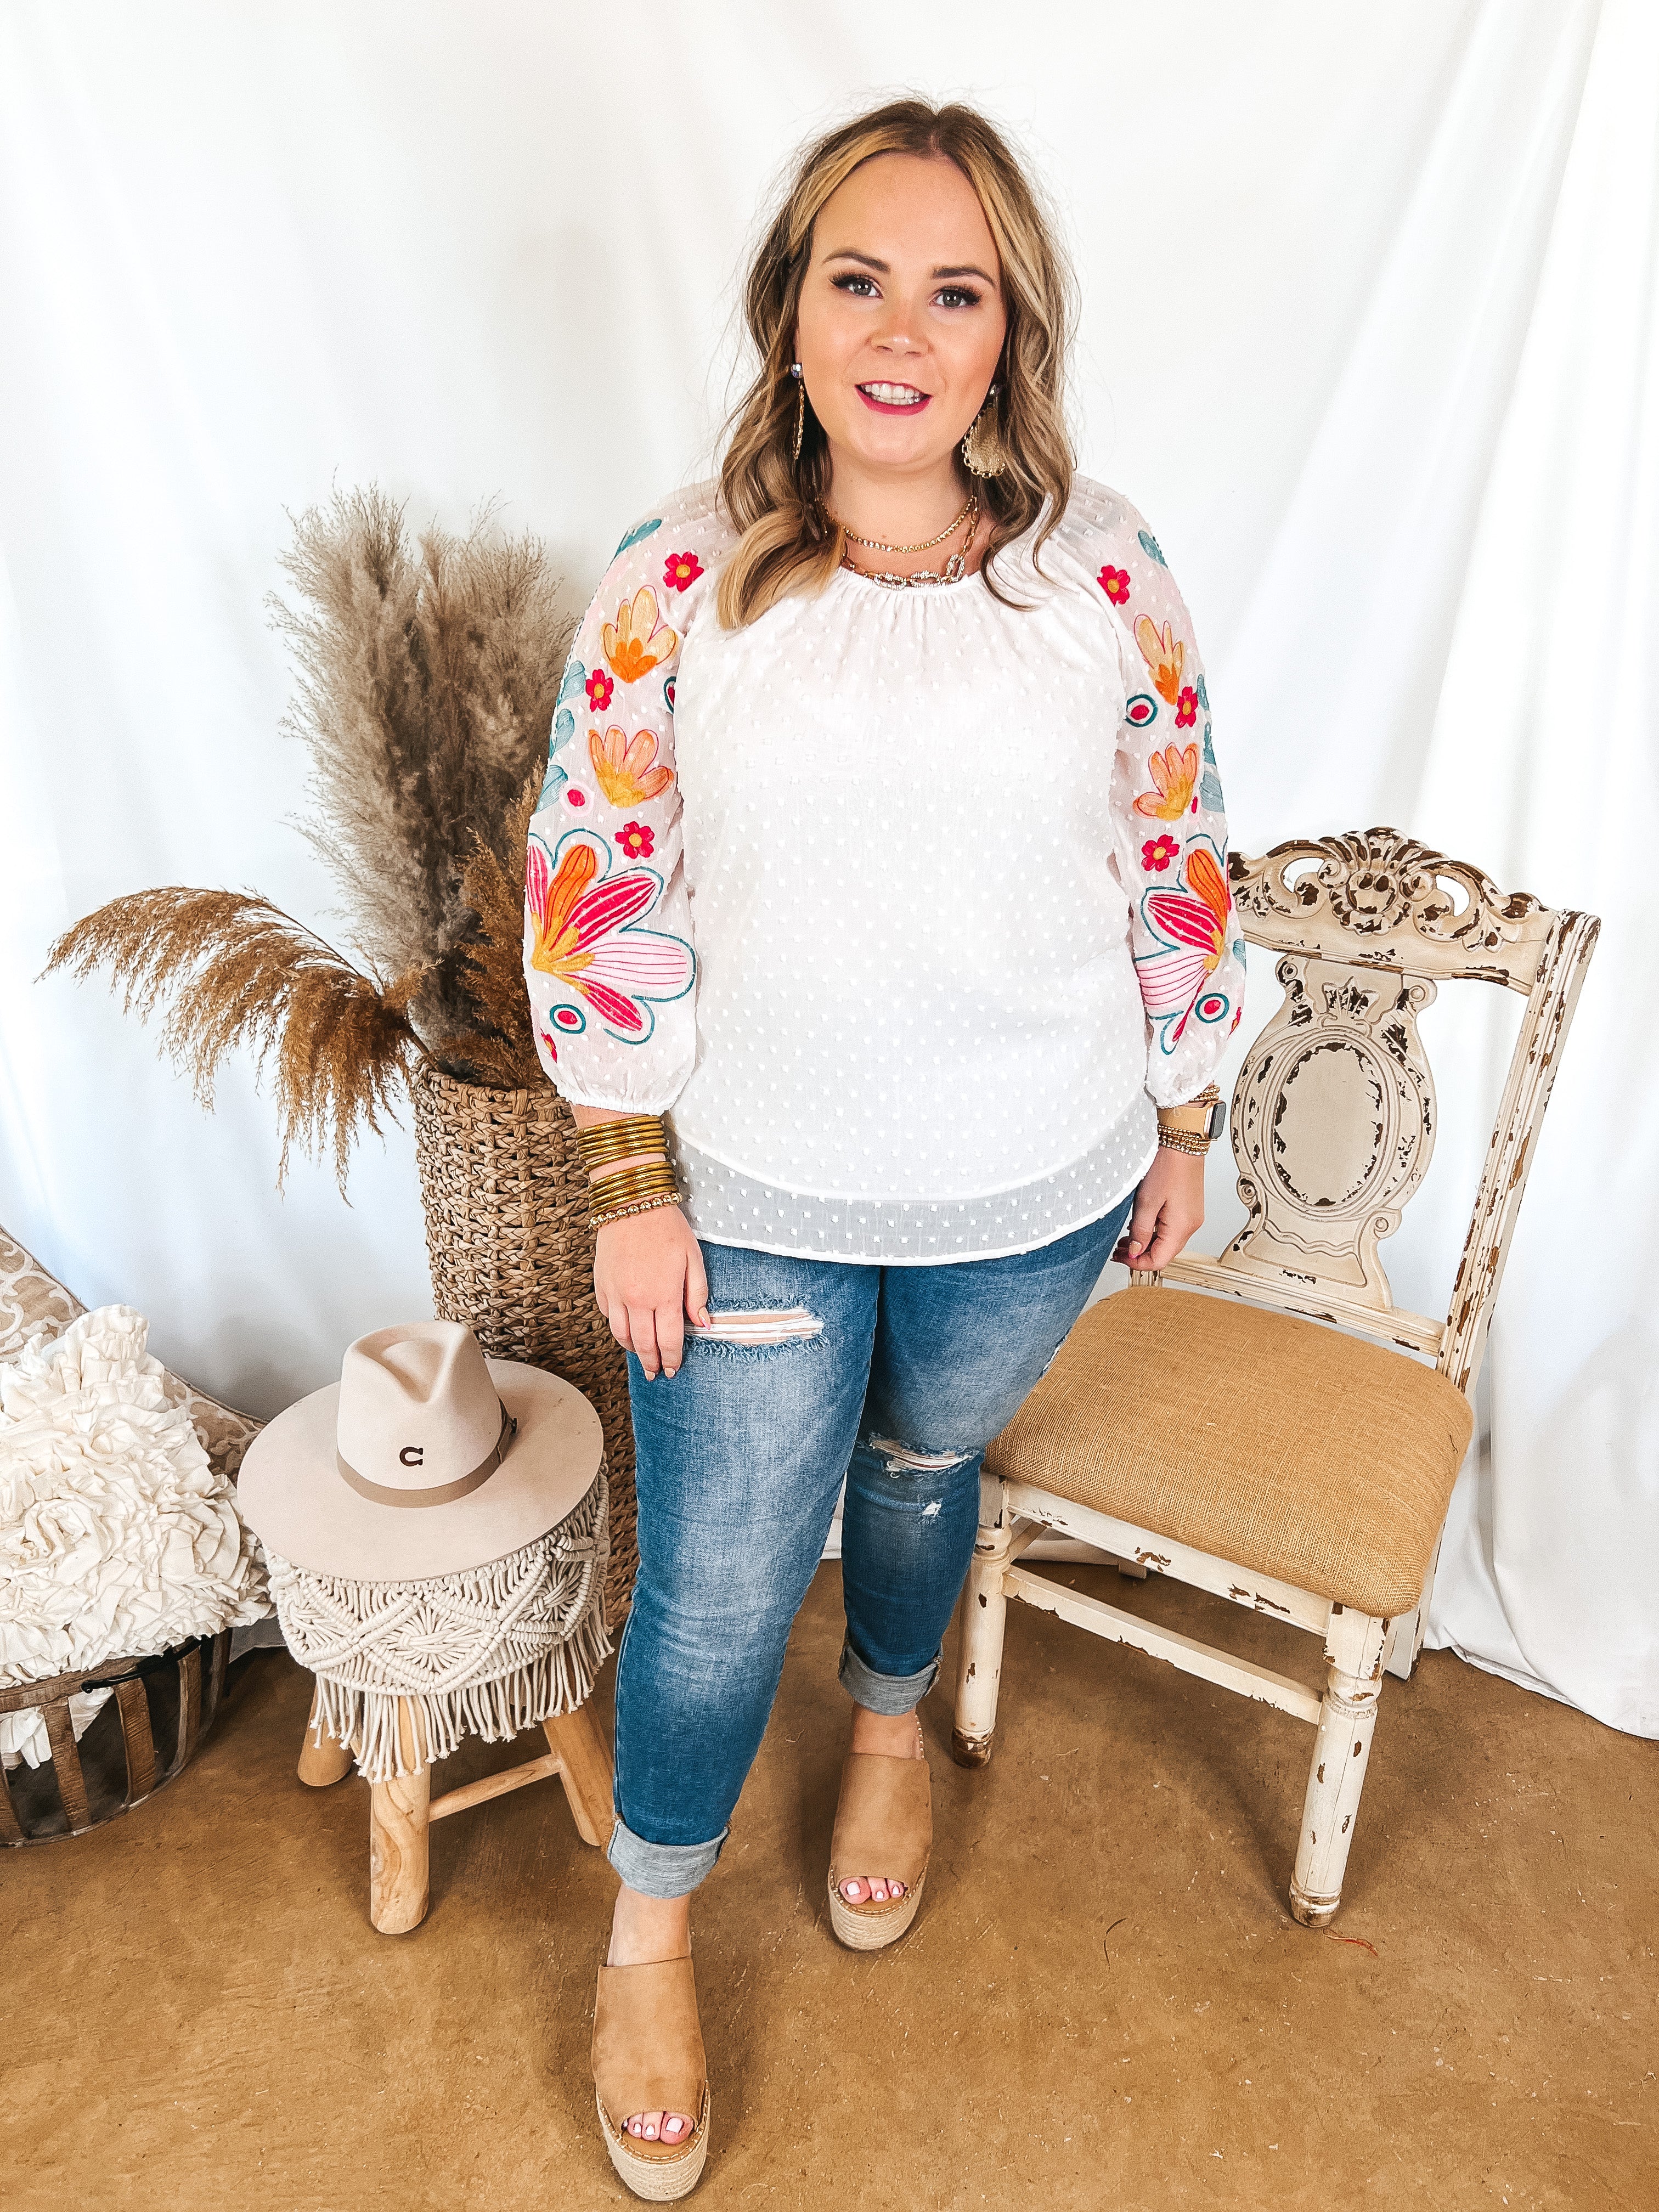 Right About You Floral Embroidered 3/4 Sleeve Top in White - Giddy Up Glamour Boutique